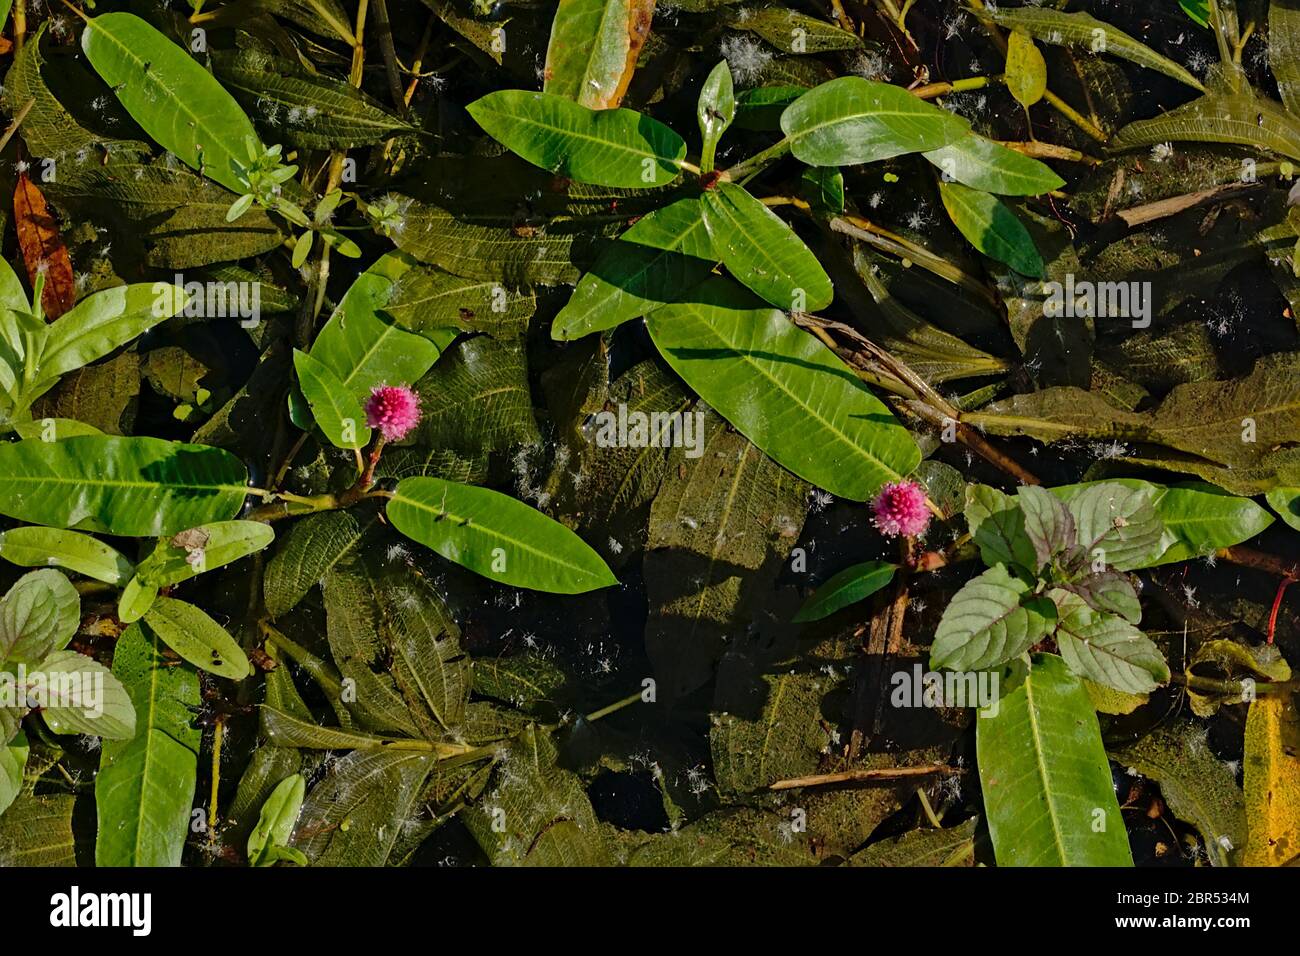 Water knotweed with pink flower - Persicaria amphibia. Stock Photo